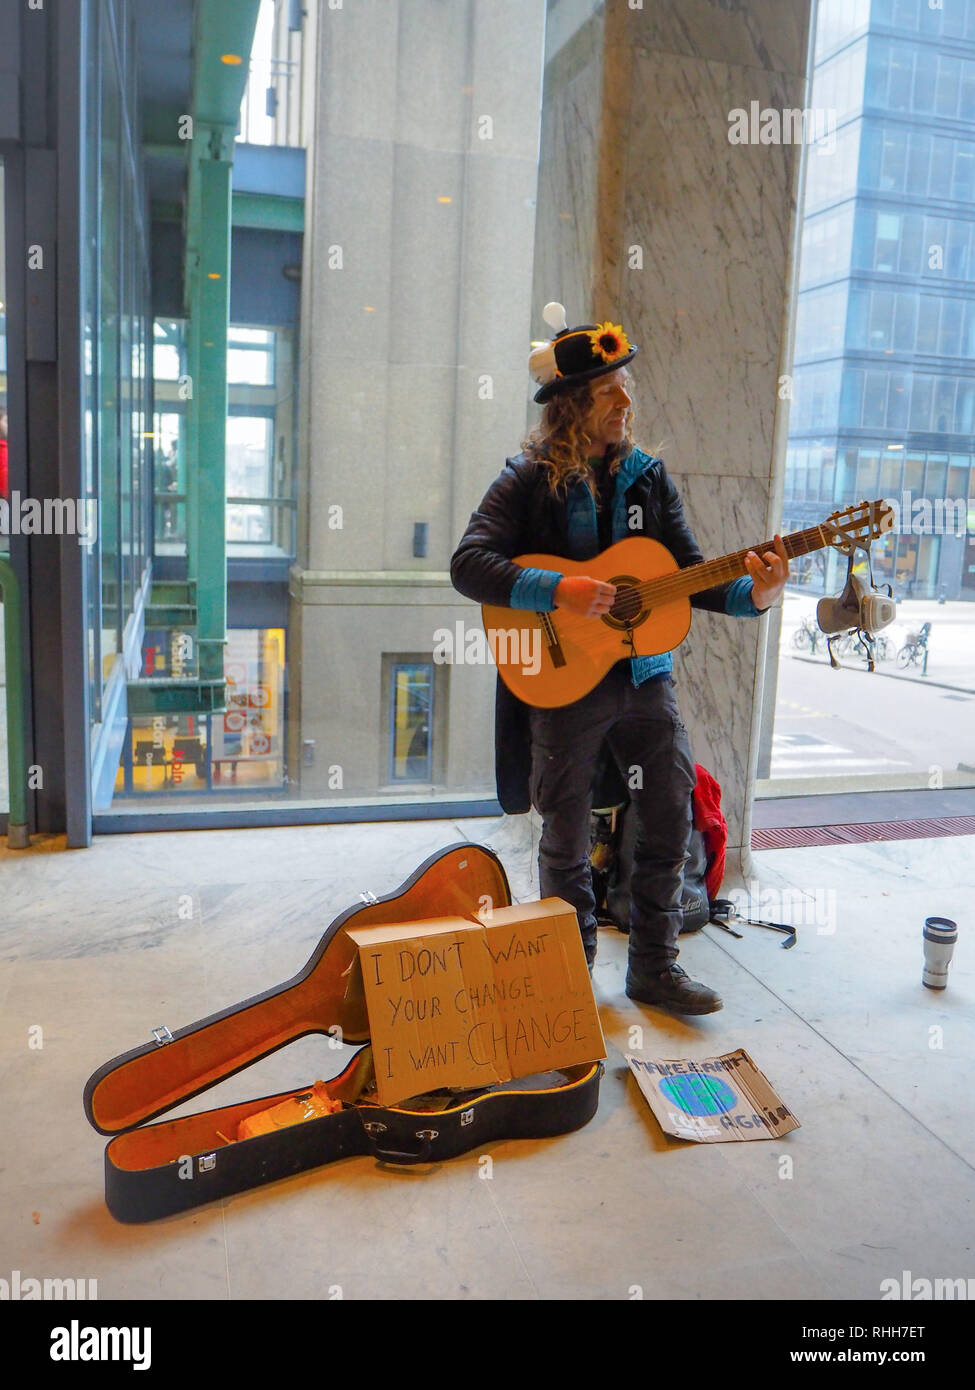 January 2019 - Brussels, Belgium: male street artist playing guitar during a climate change protest rally as a call to action Stock Photo